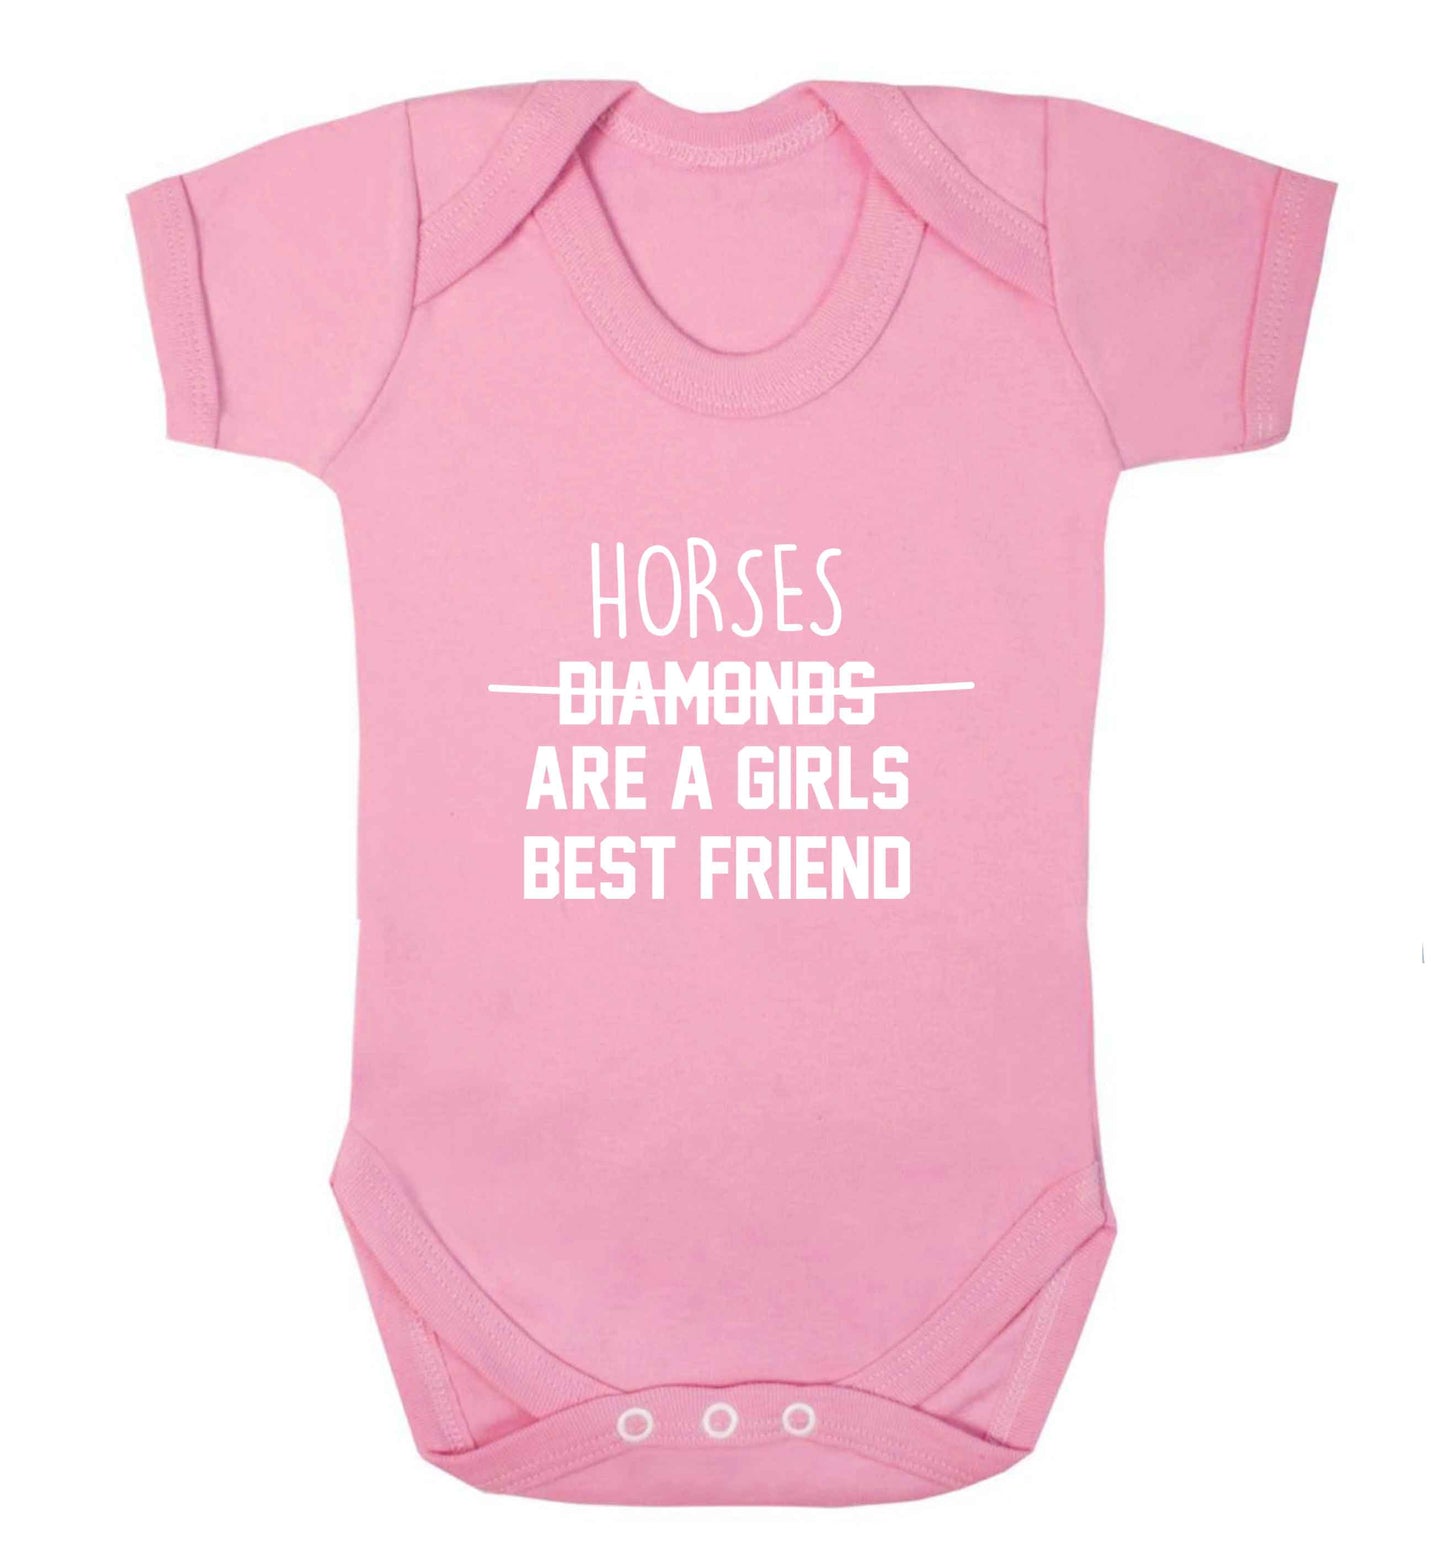 Horses are a girls best friend baby vest pale pink 18-24 months